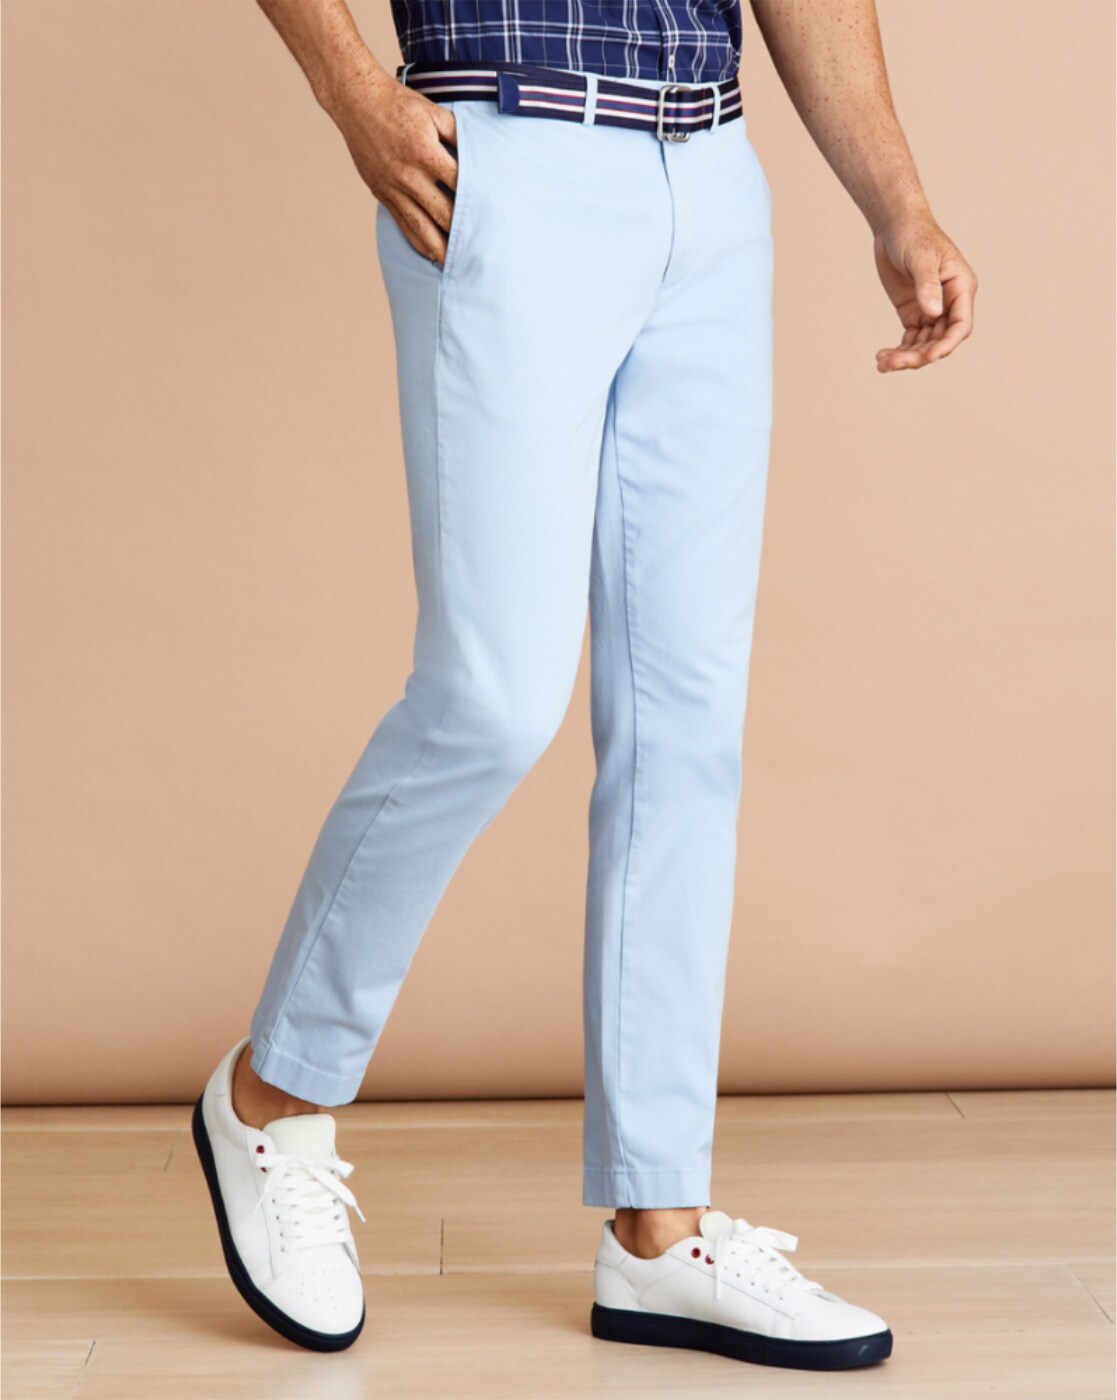 Farrelly Pant in Ice blue | Academy Brand